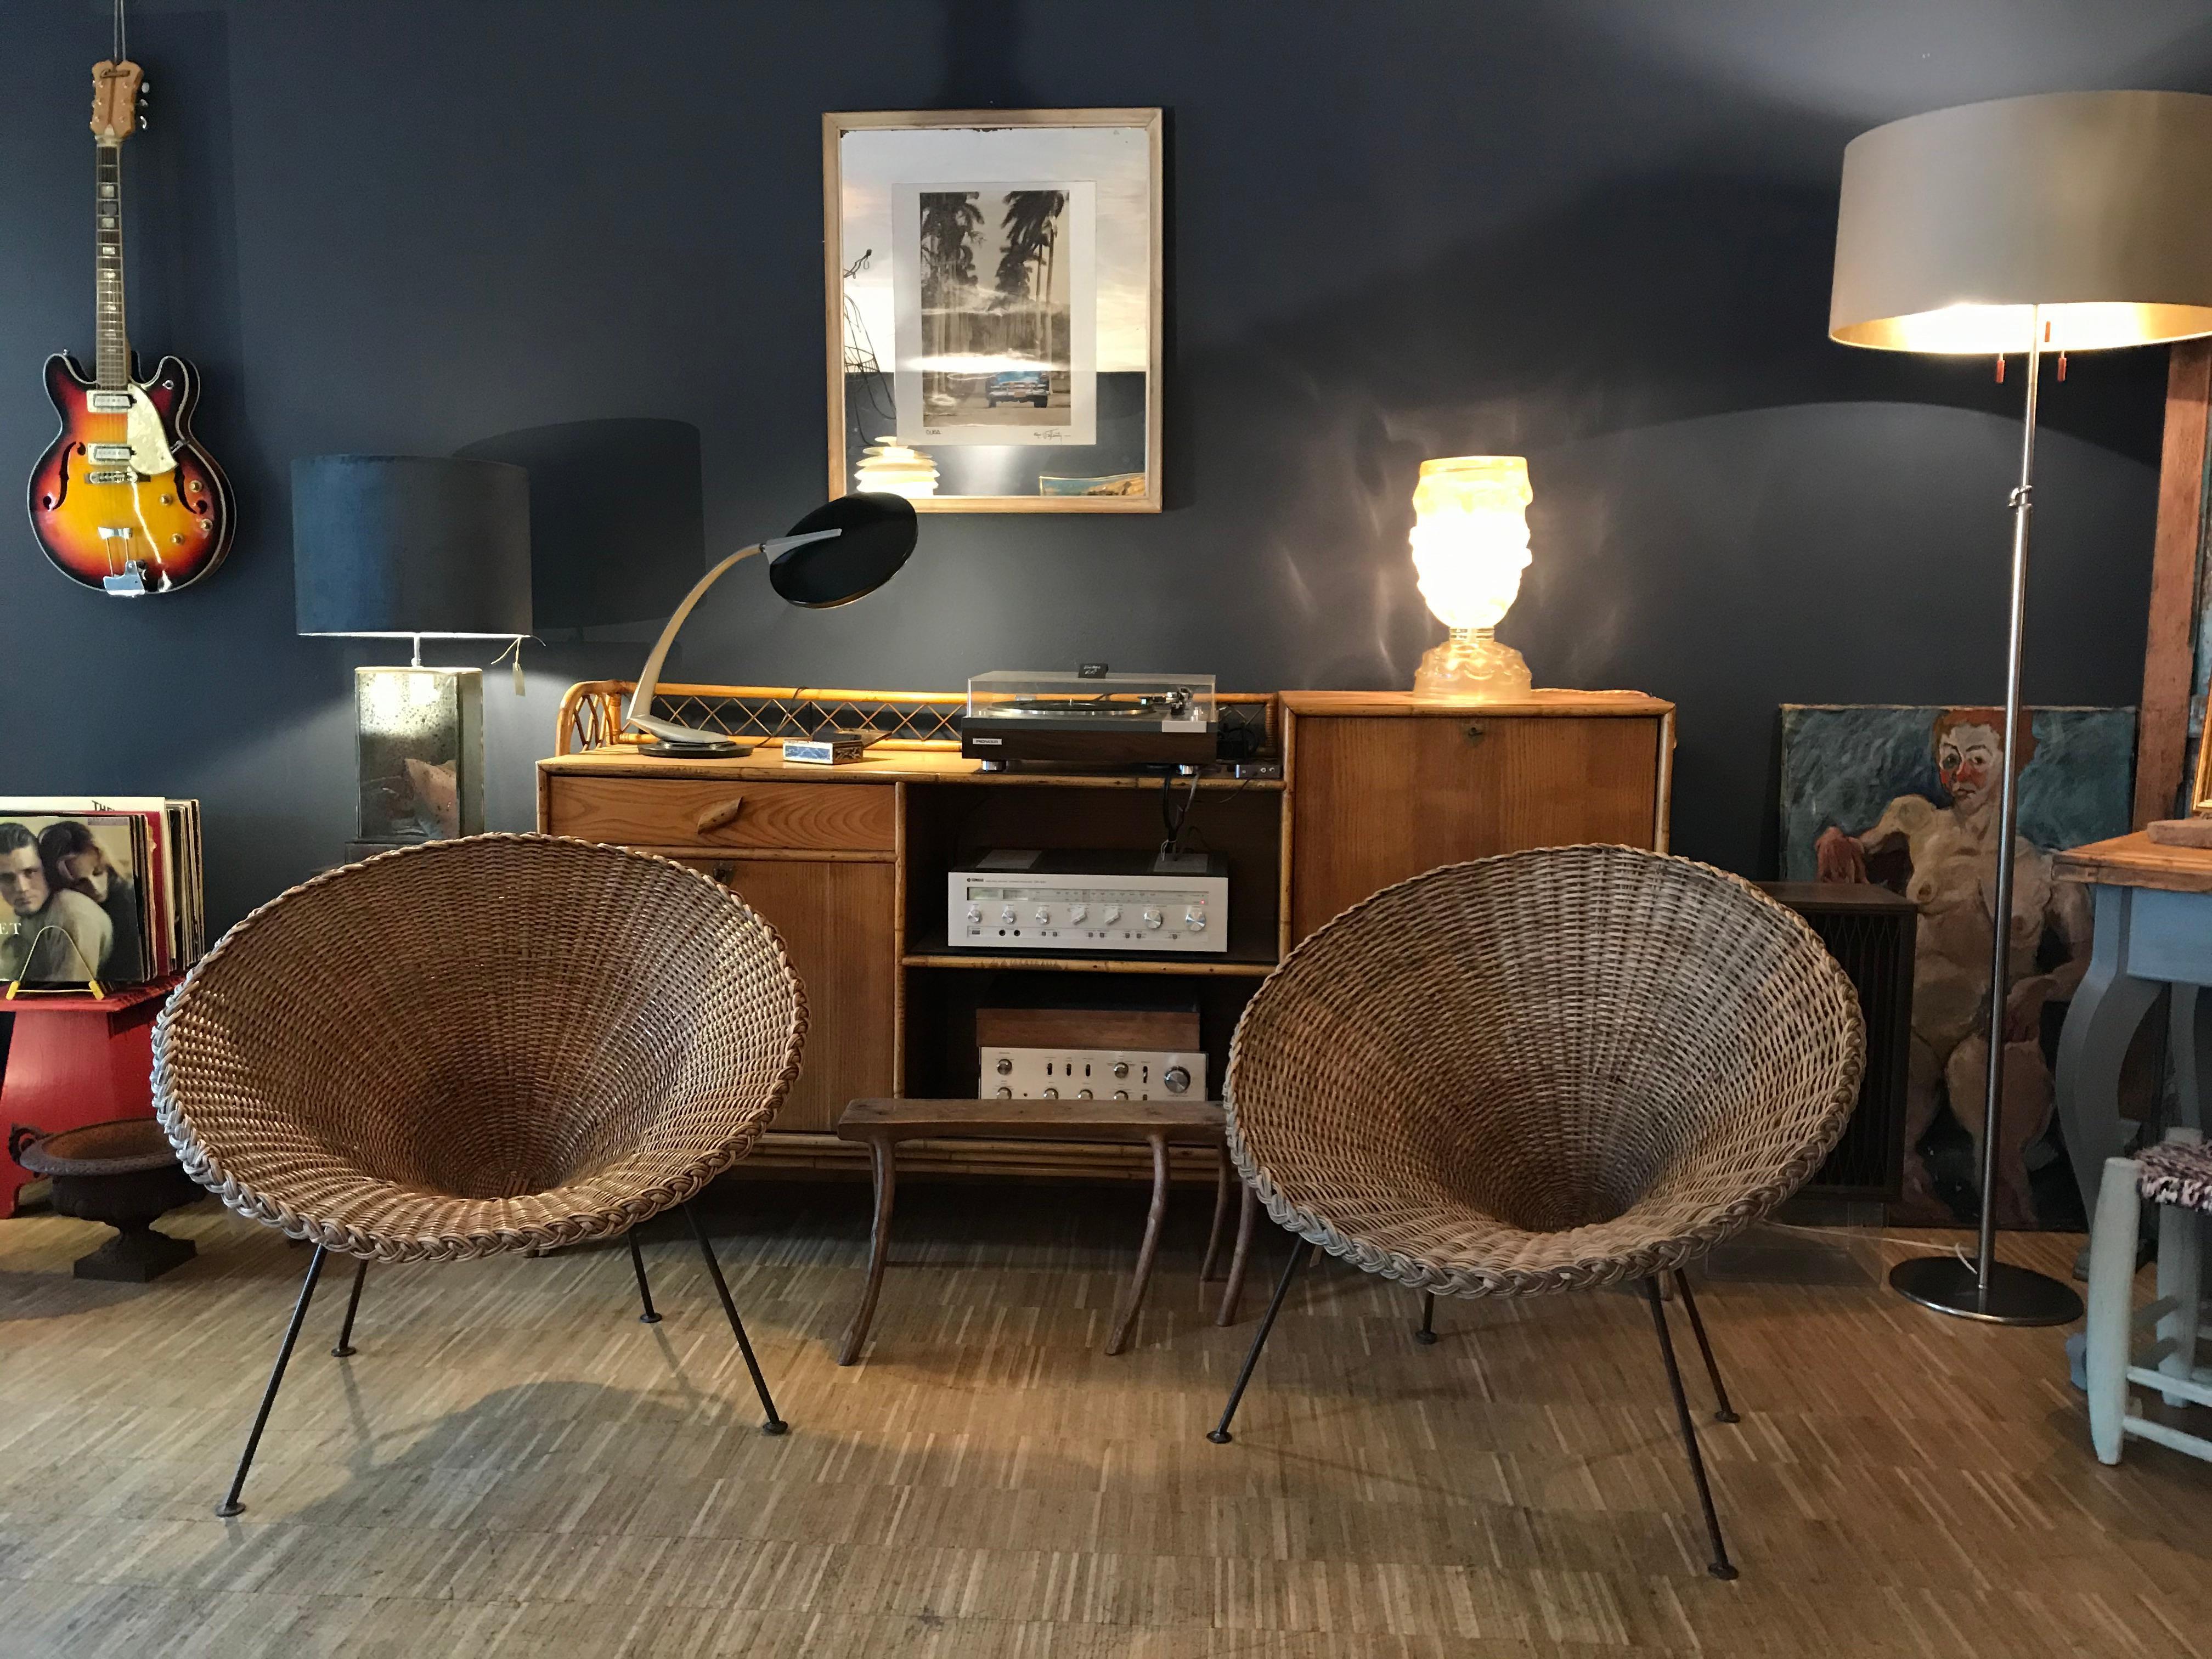 Large pair of sunflower-shaped rattan chairs. Designed in the style of Roberto Mango. Features a base in polished iron rod. Wicker seats are removable for storage.